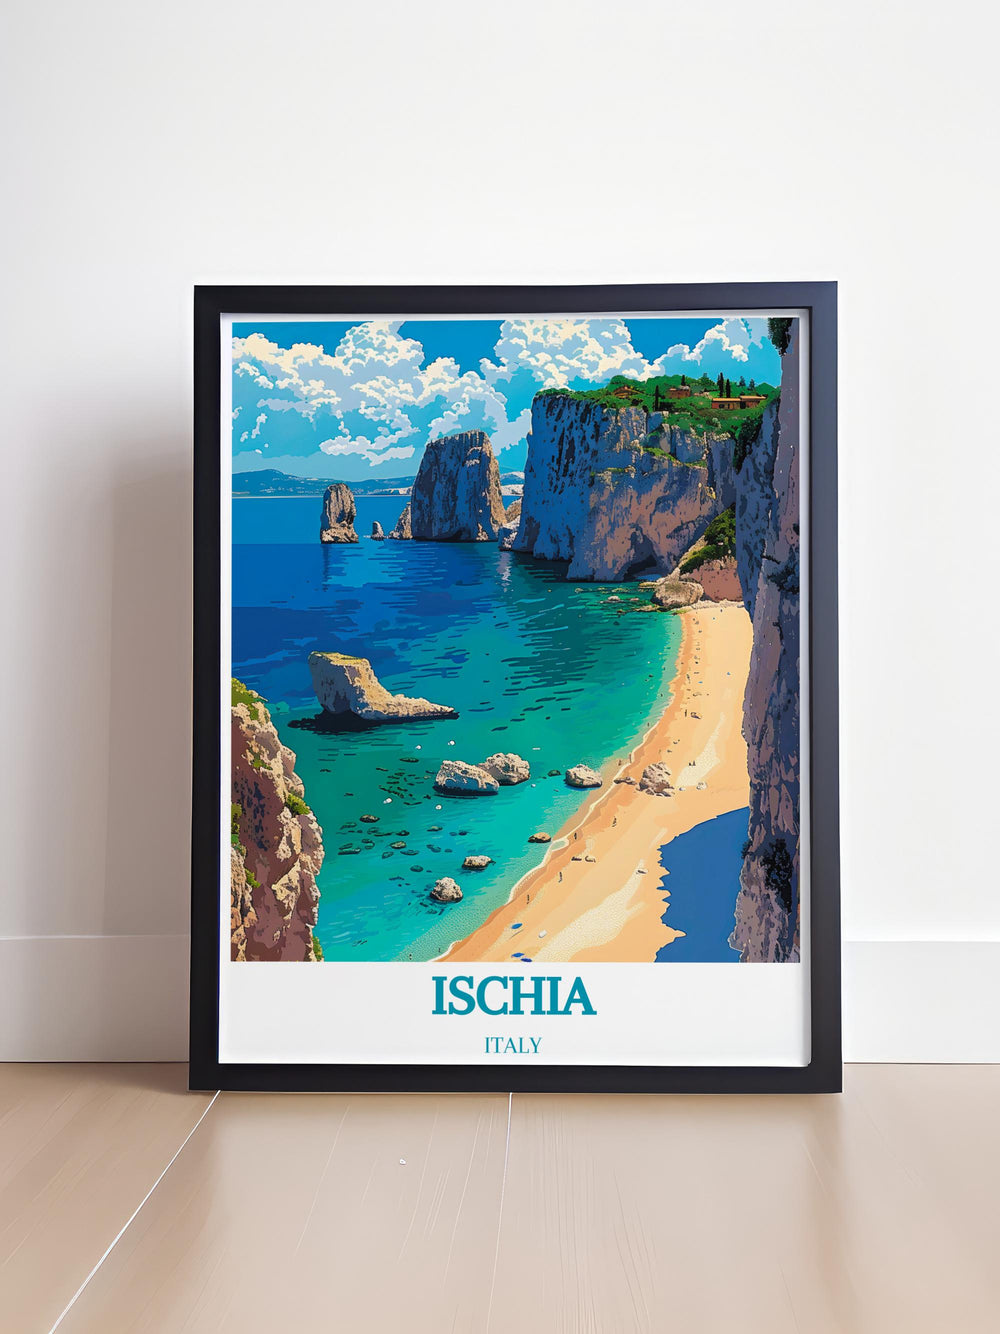 Wall art of Spiaggia dei Maronti with detailed depiction of the beach and surrounding nature ideal for coastal themed decor